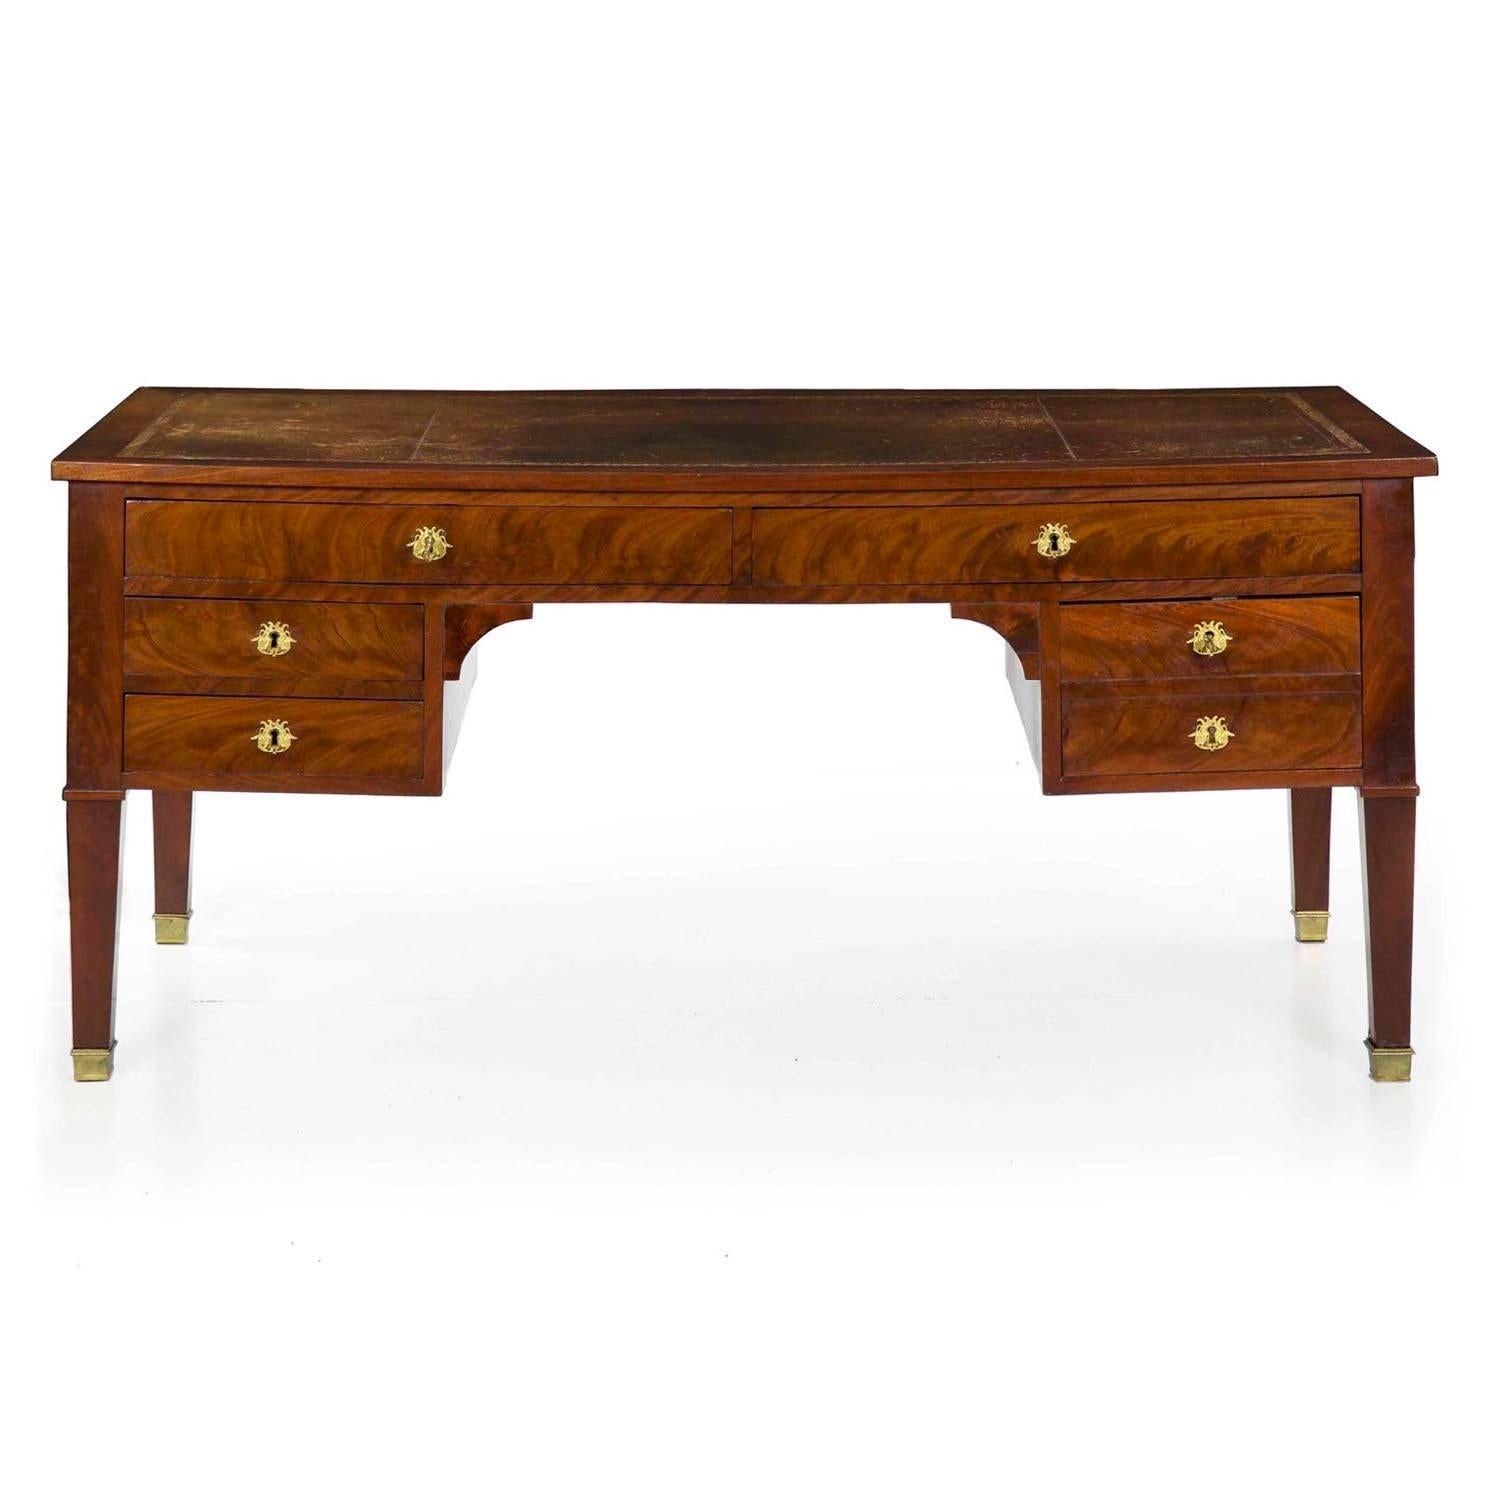 An incredibly fine presentation piece crafted of the finest materials, this gorgeous French neoclassical writing desk is a vivid strikepoint. Dressed in choice selections of flamed mahogany, the veneers are laid out with precision in a way that